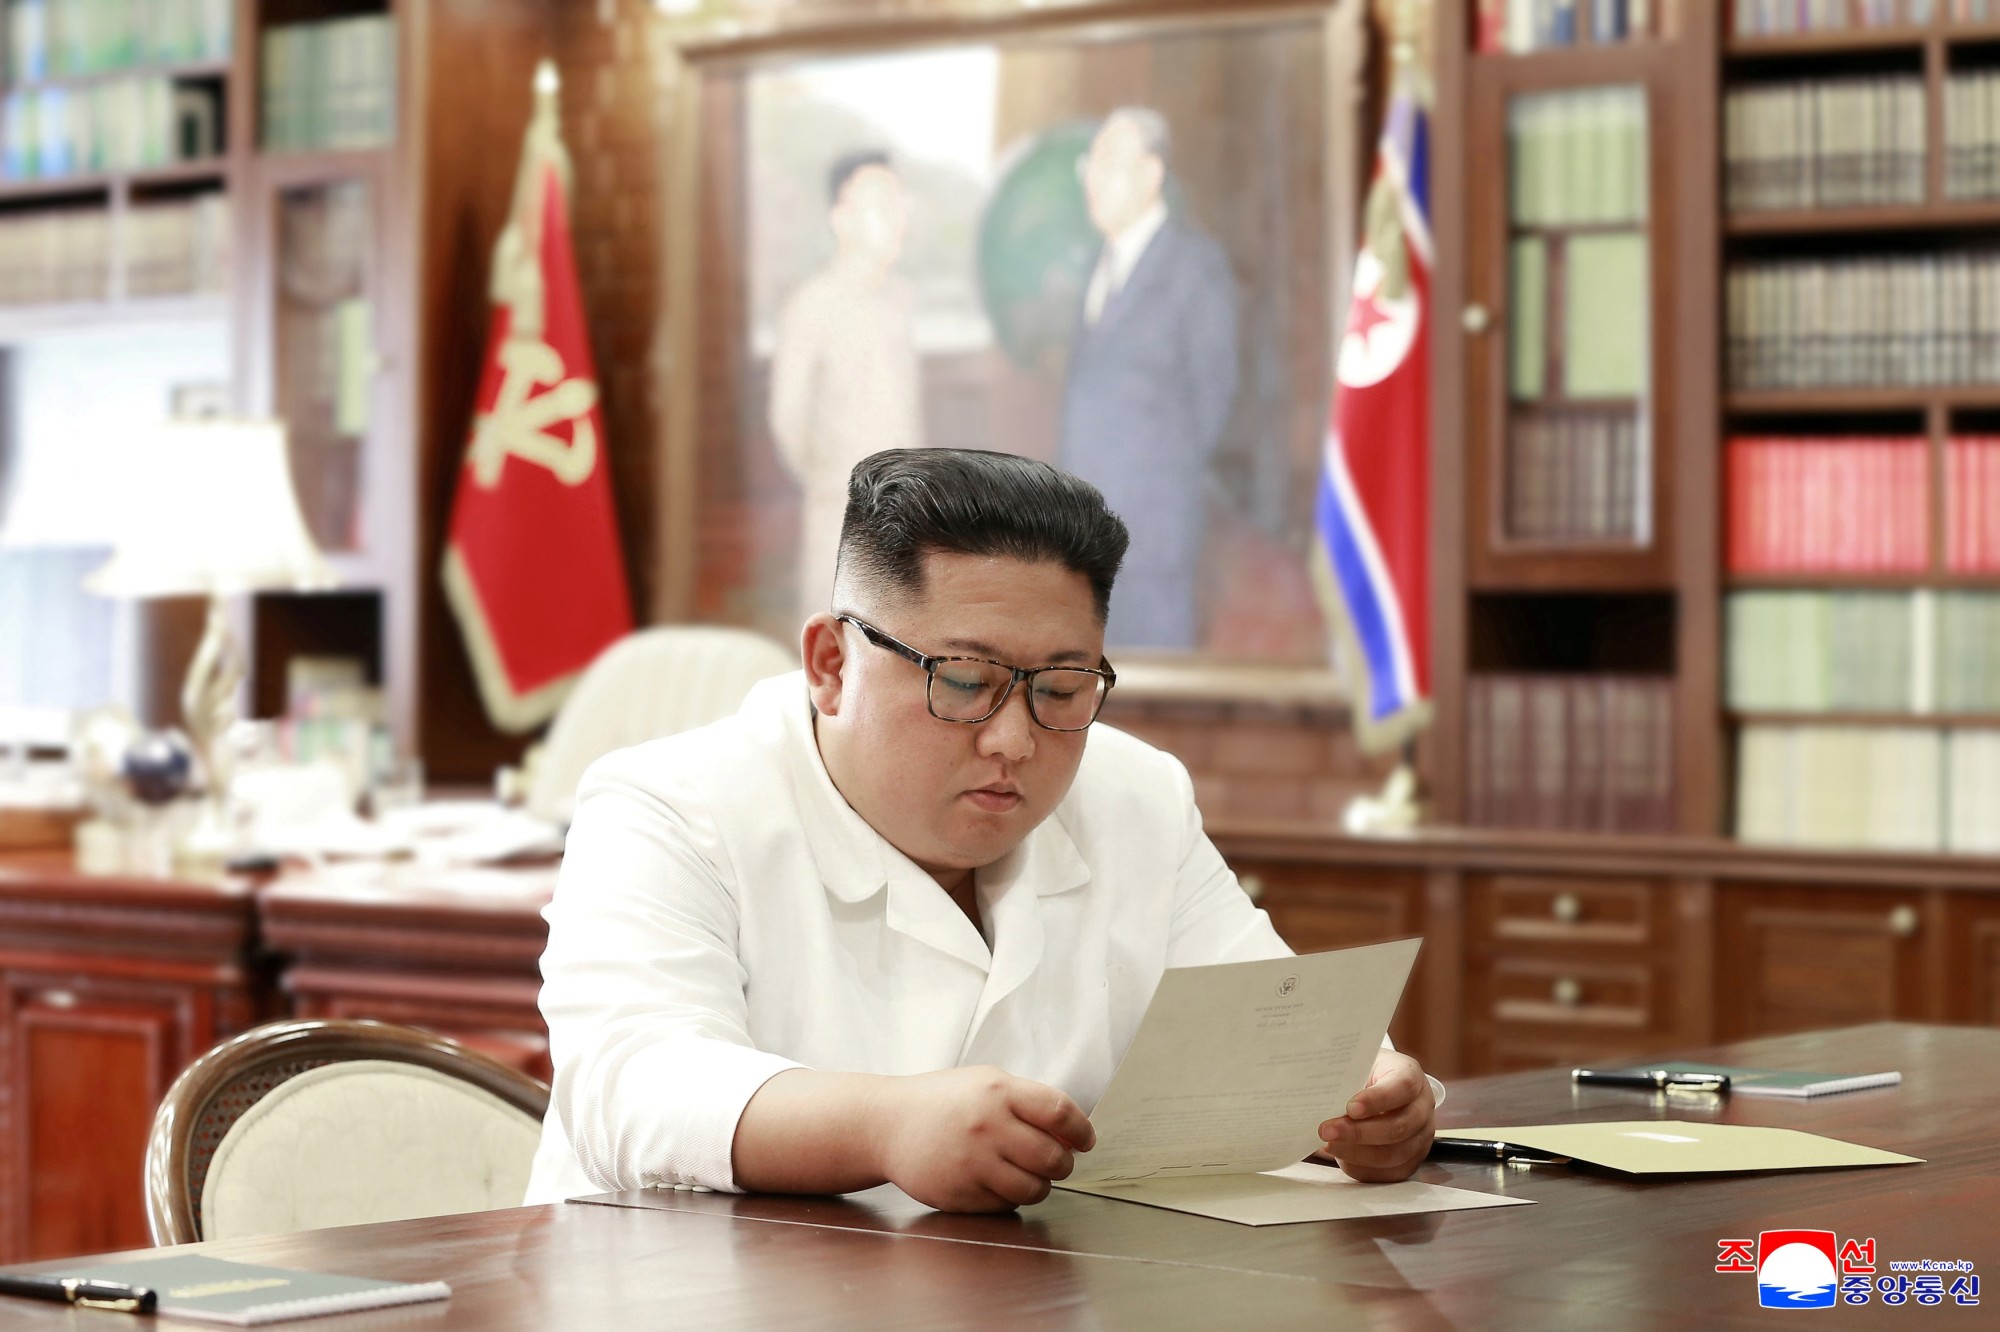 North Korean leader Kim Jong Un reads a letter from U.S. President Donald Trump in Pyongyang in this picture released Sunday. | REUTERS